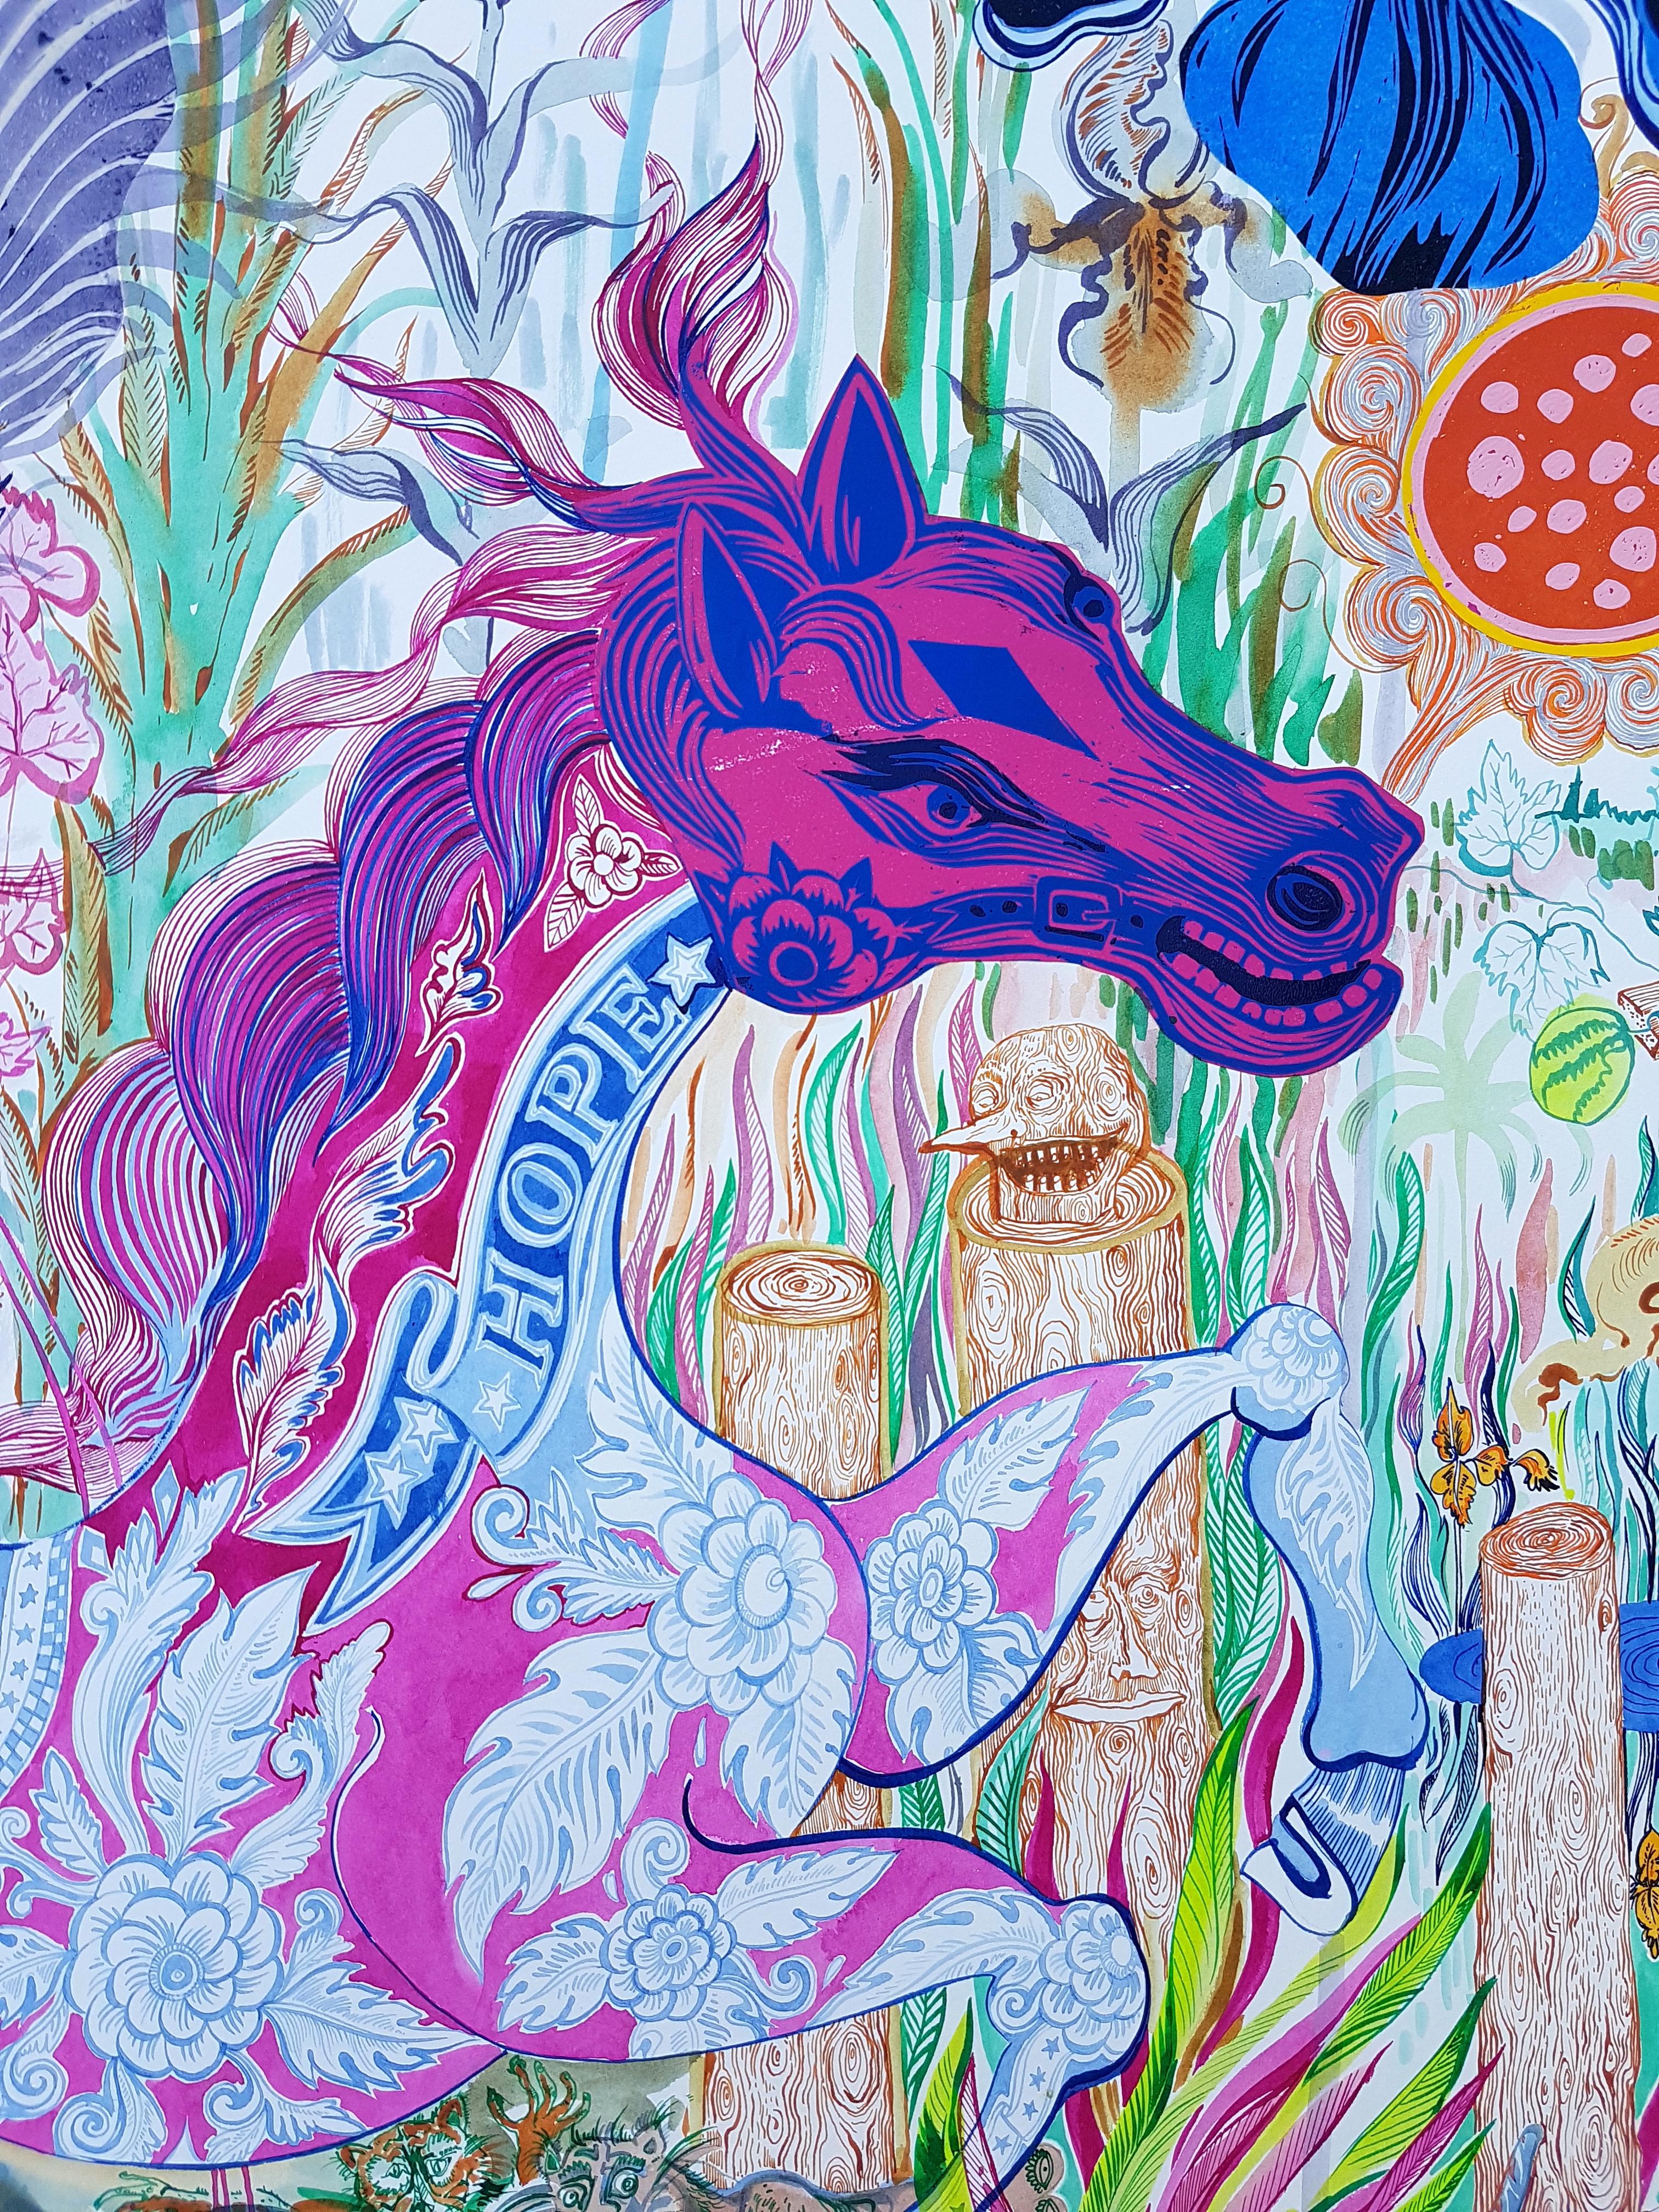  Surrealist Large Royal College of Art LGBTQ+ Female Artist Horse Pink Blue - Painting by Isabel Rock